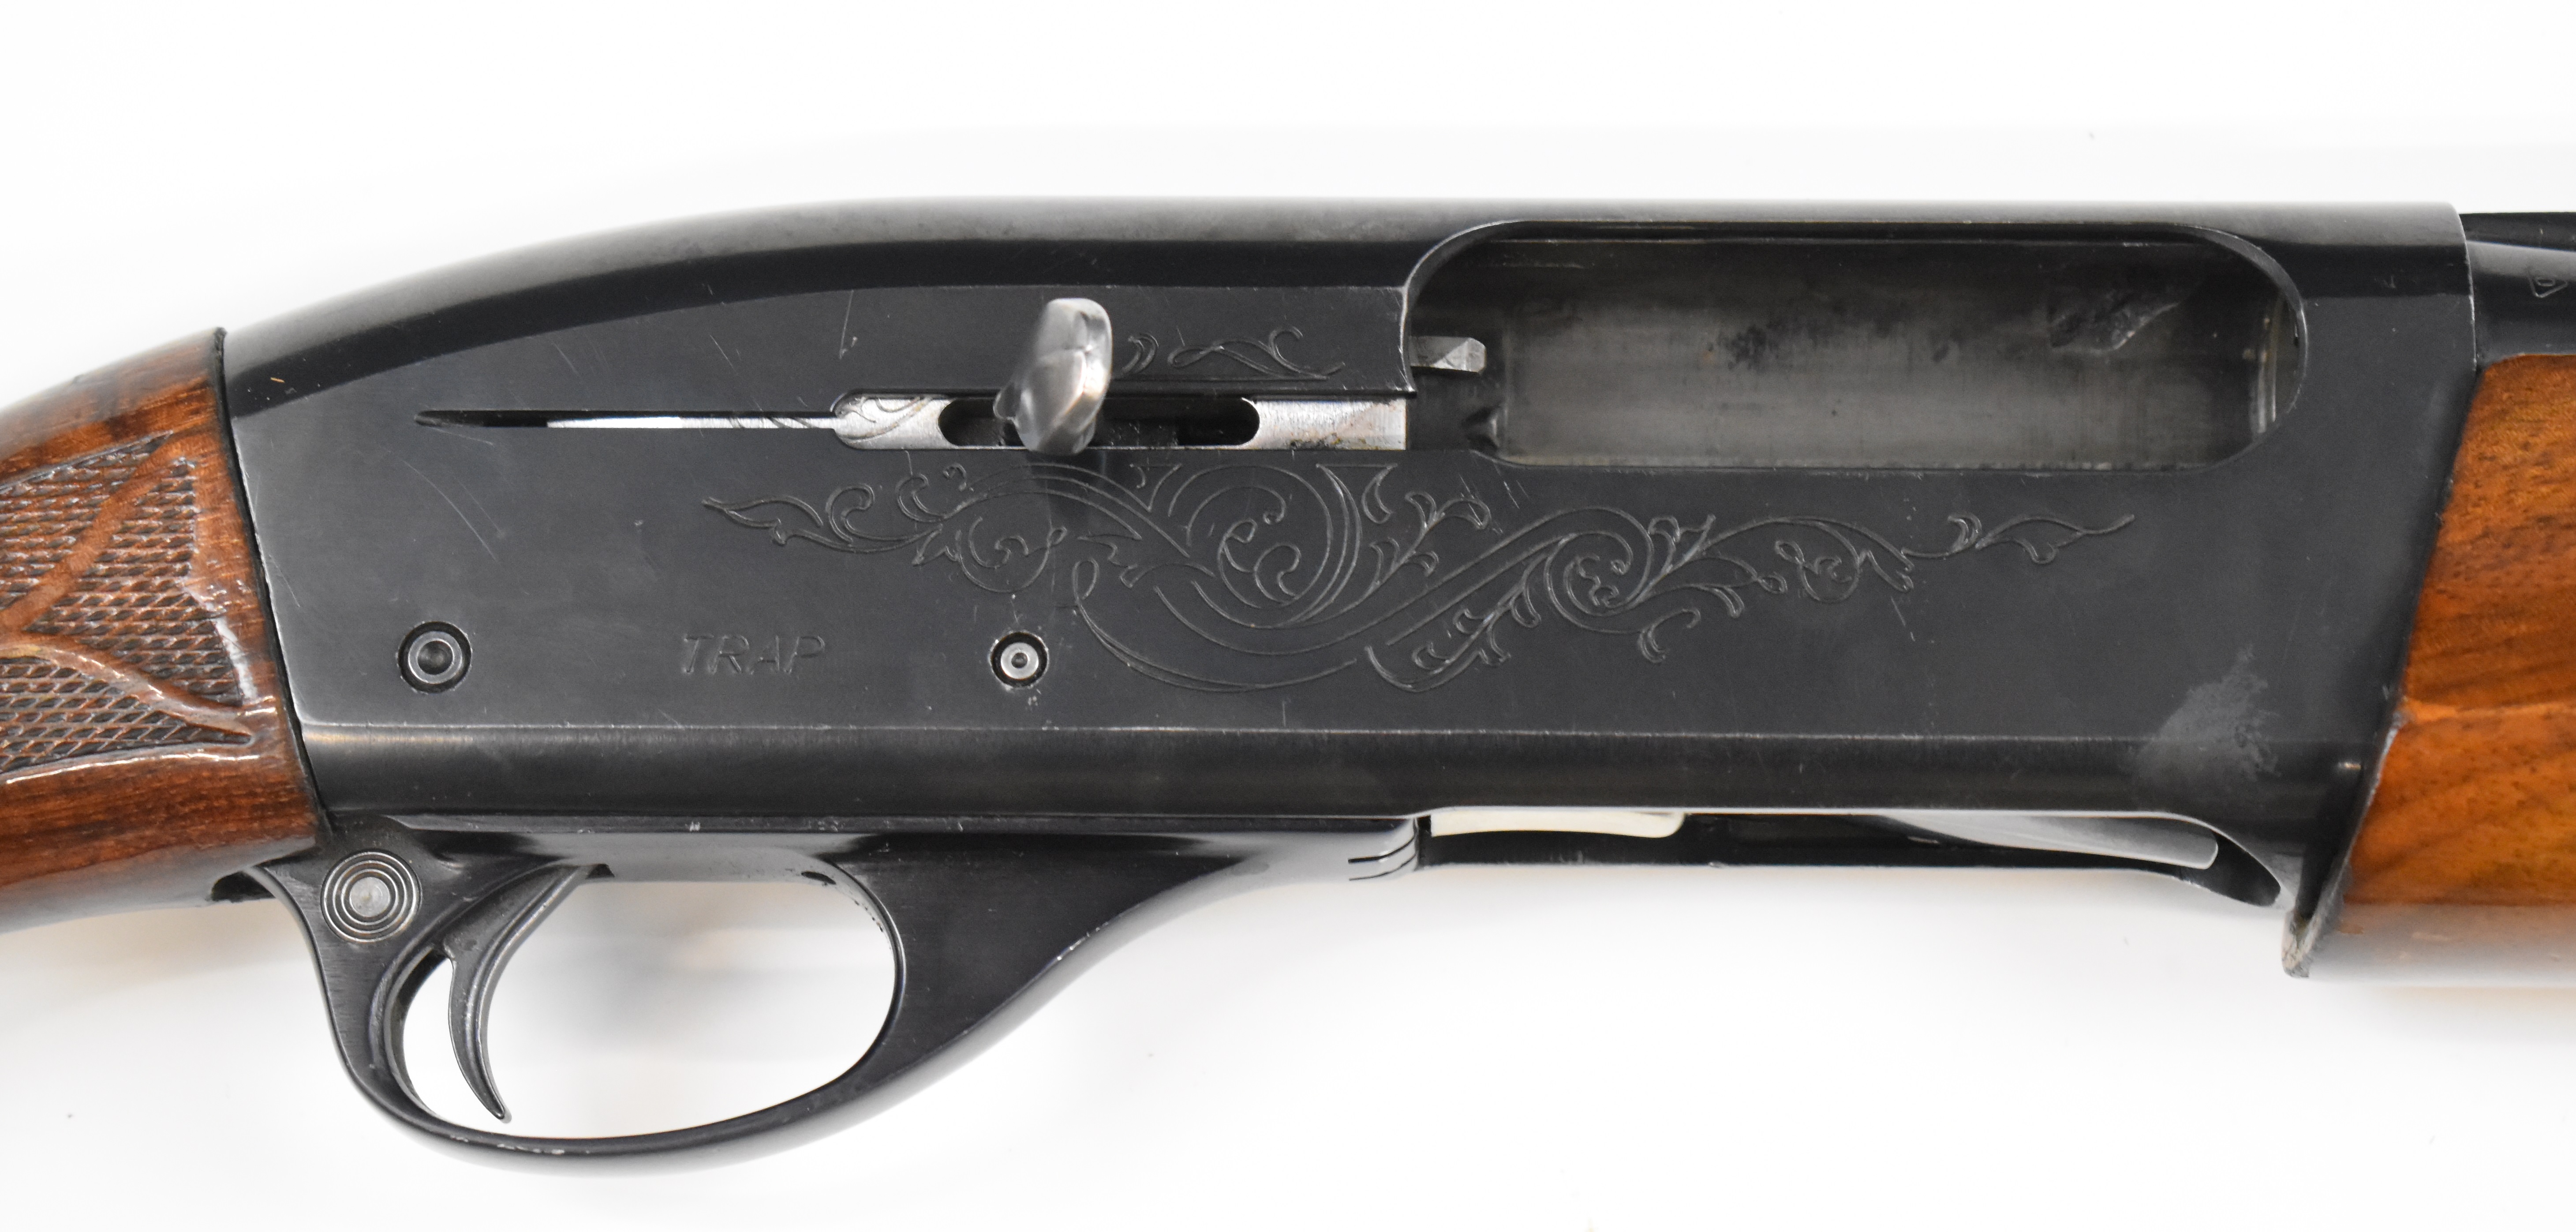 Remington Model 1100 Trap 12 bore 3-shot semi-automatic shotgun with ornately carved and chequered - Image 6 of 11